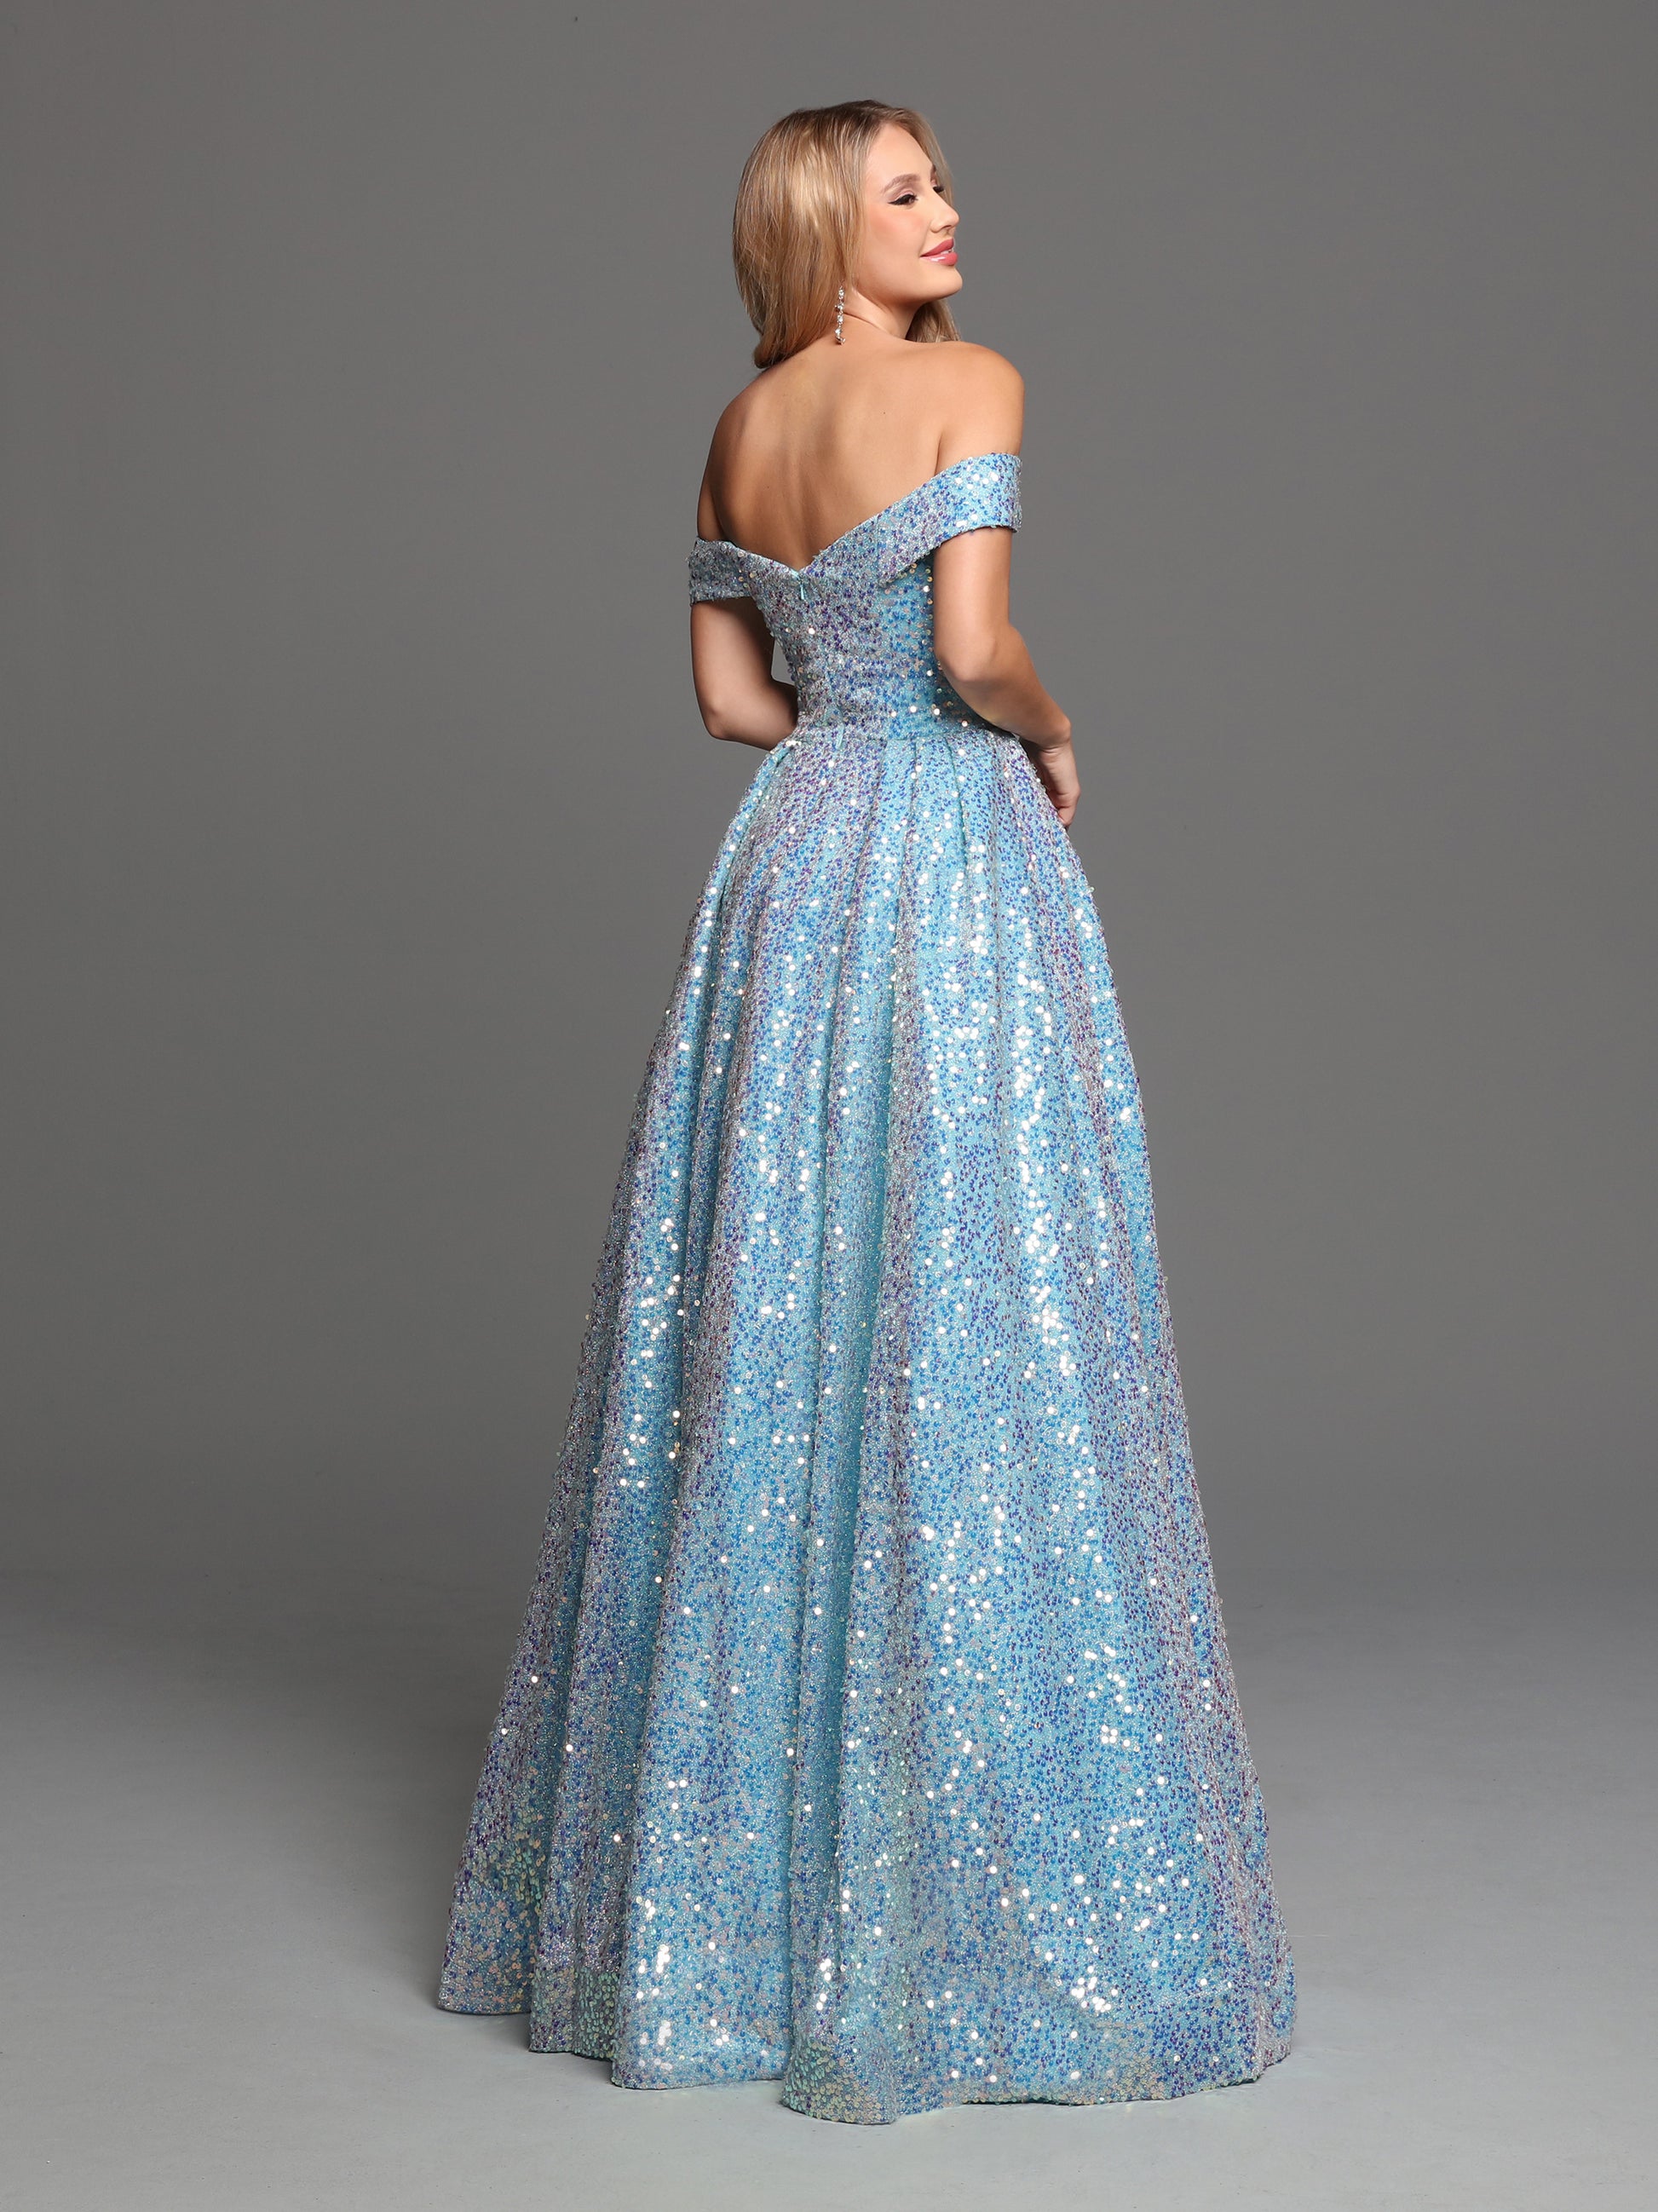 Sparkle Prom 72261 Long Sequin A Line Prom Dress Ballgown off the Shoulder Pageant Gown Pleated hip with full skirt   Sizes: 0-20  Colors: Magic Blue